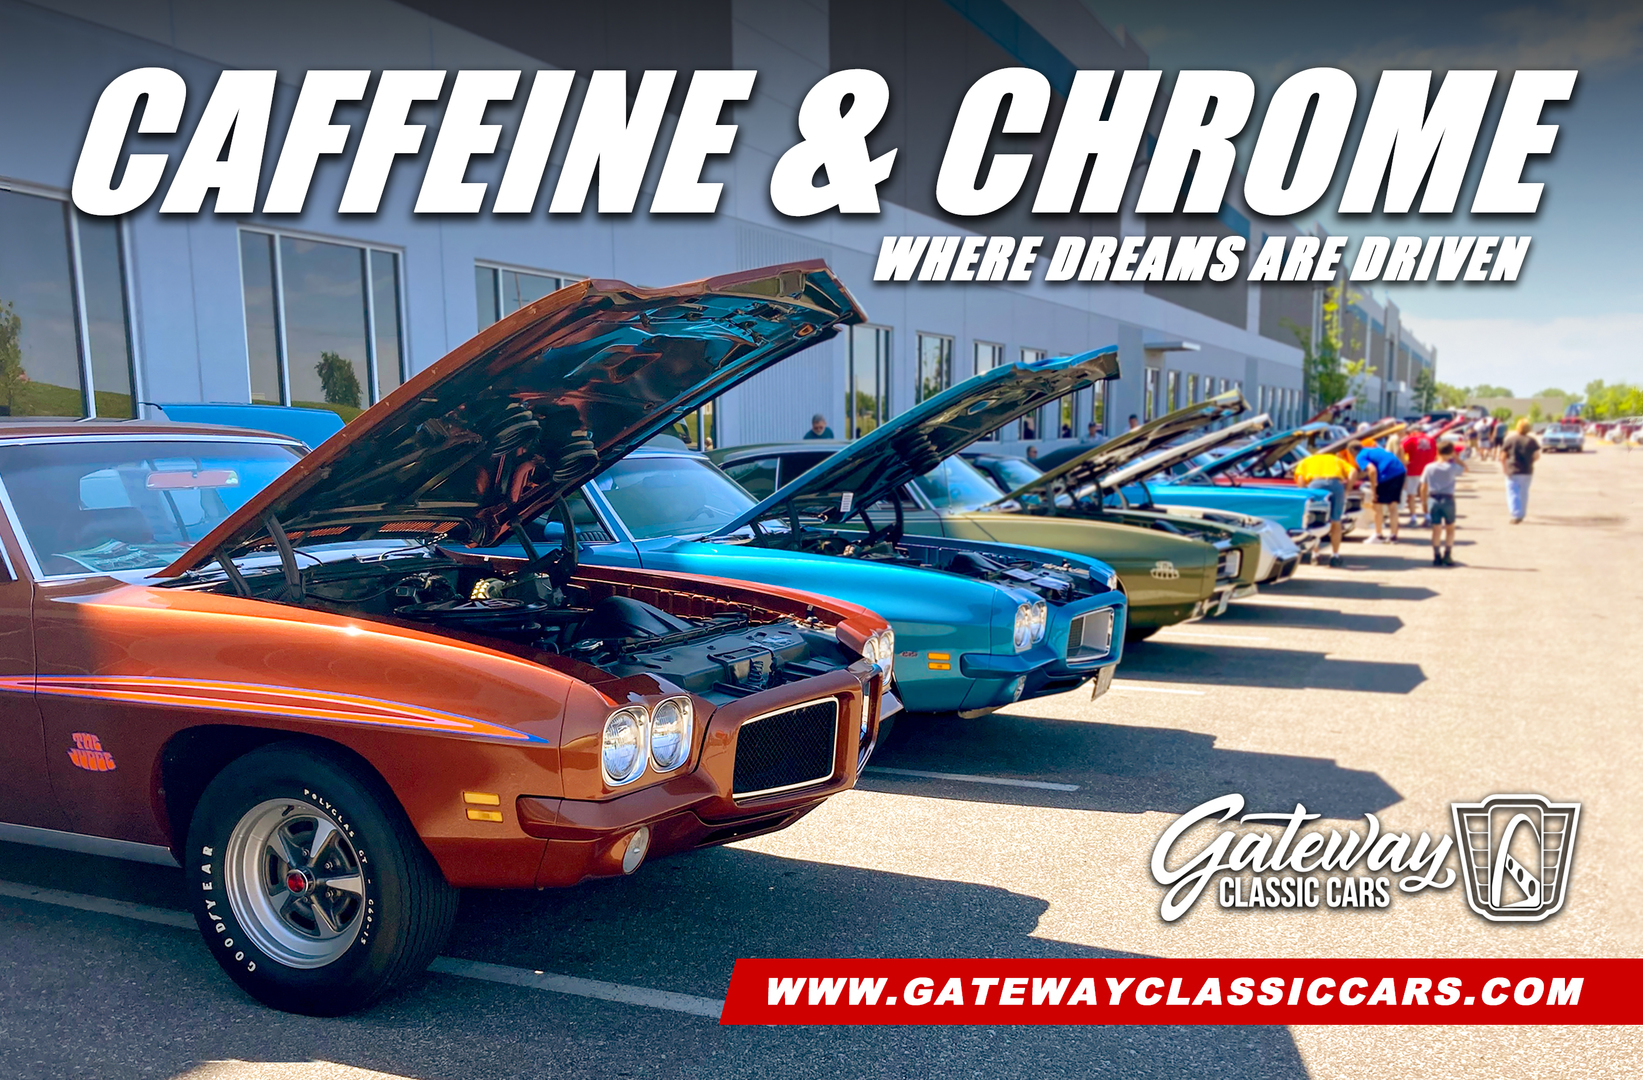 Caffeine and Chrome - Classic Cars and Coffee at Gateway Classic Cars of Detroit, Dearborn, Michigan, United States